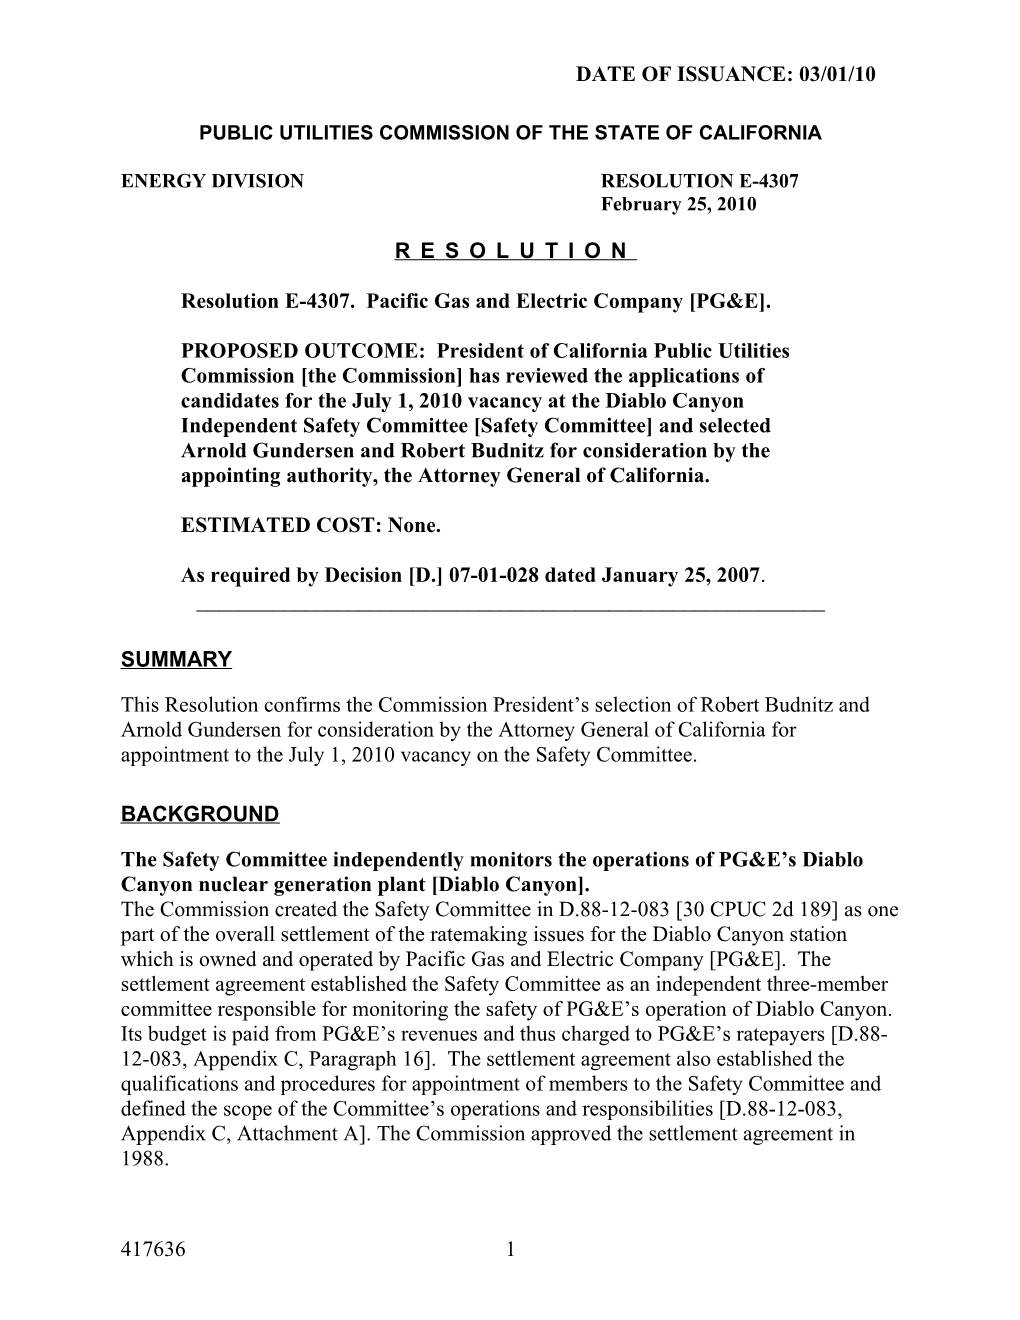 Public Utilities Commission of the State of California s54